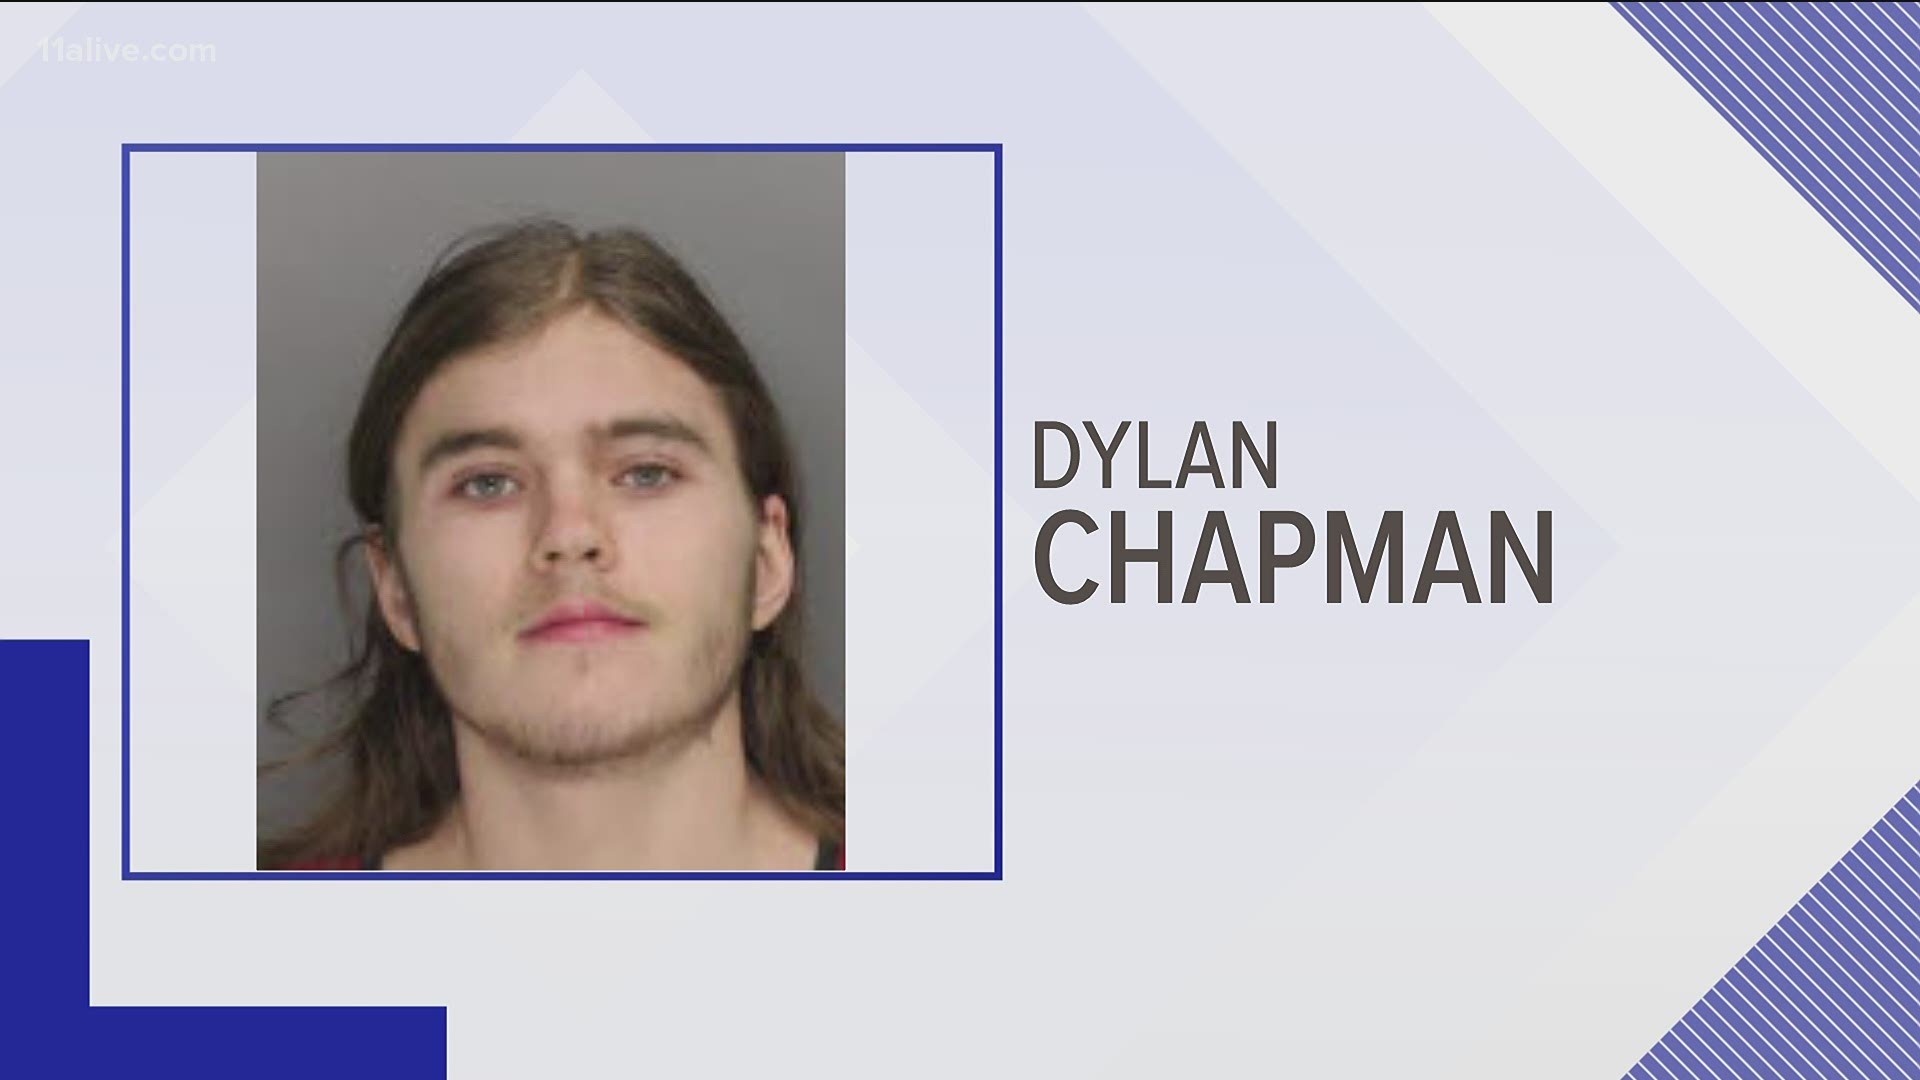 Dylan Chapman now faces 13 felony charges, according to Cobb County jail records.